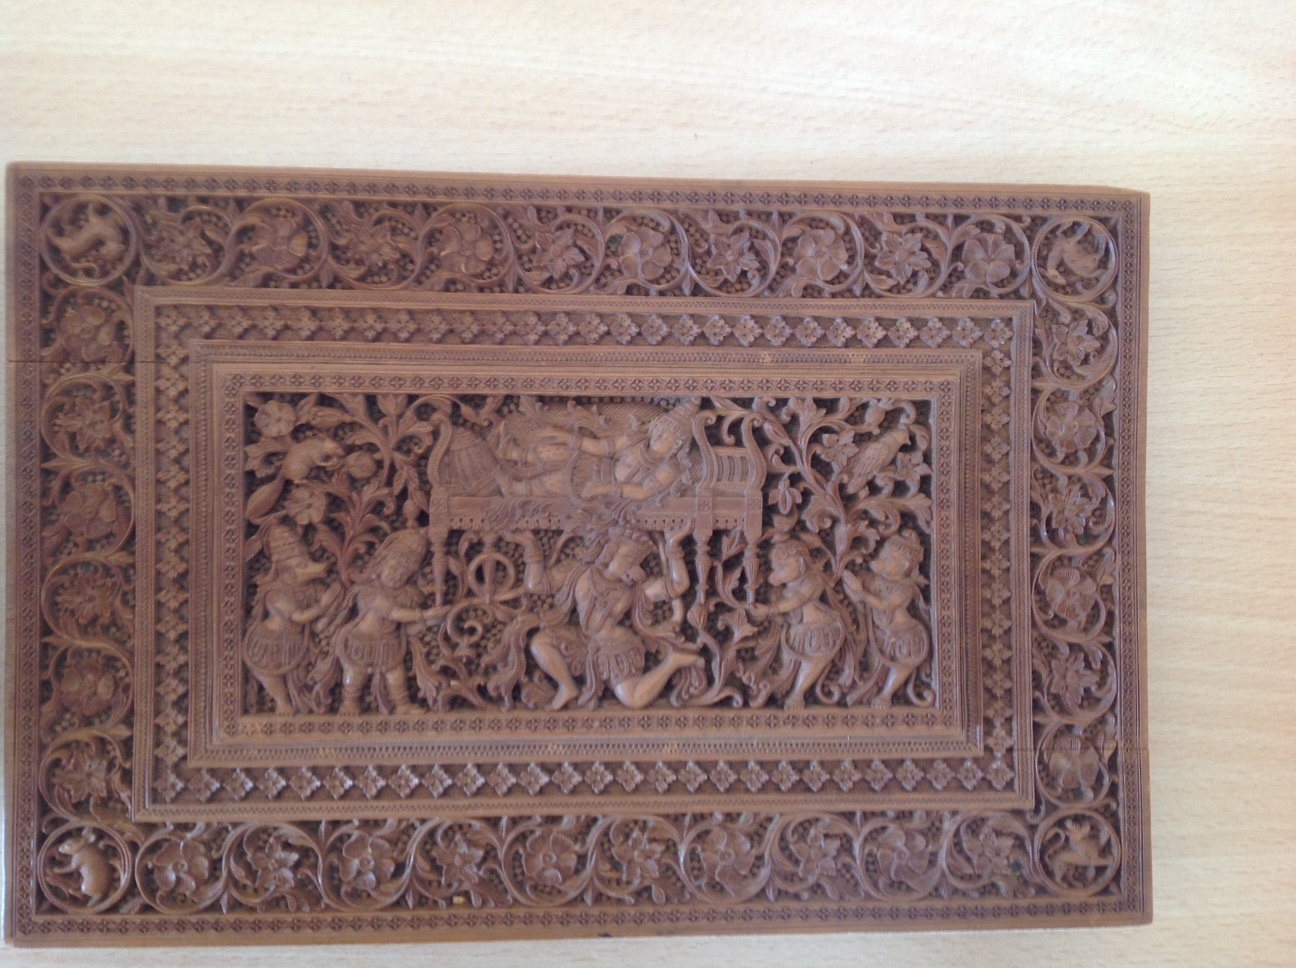 A 19th century Anglo-Indian carved sandalwood casket - Image 4 of 8